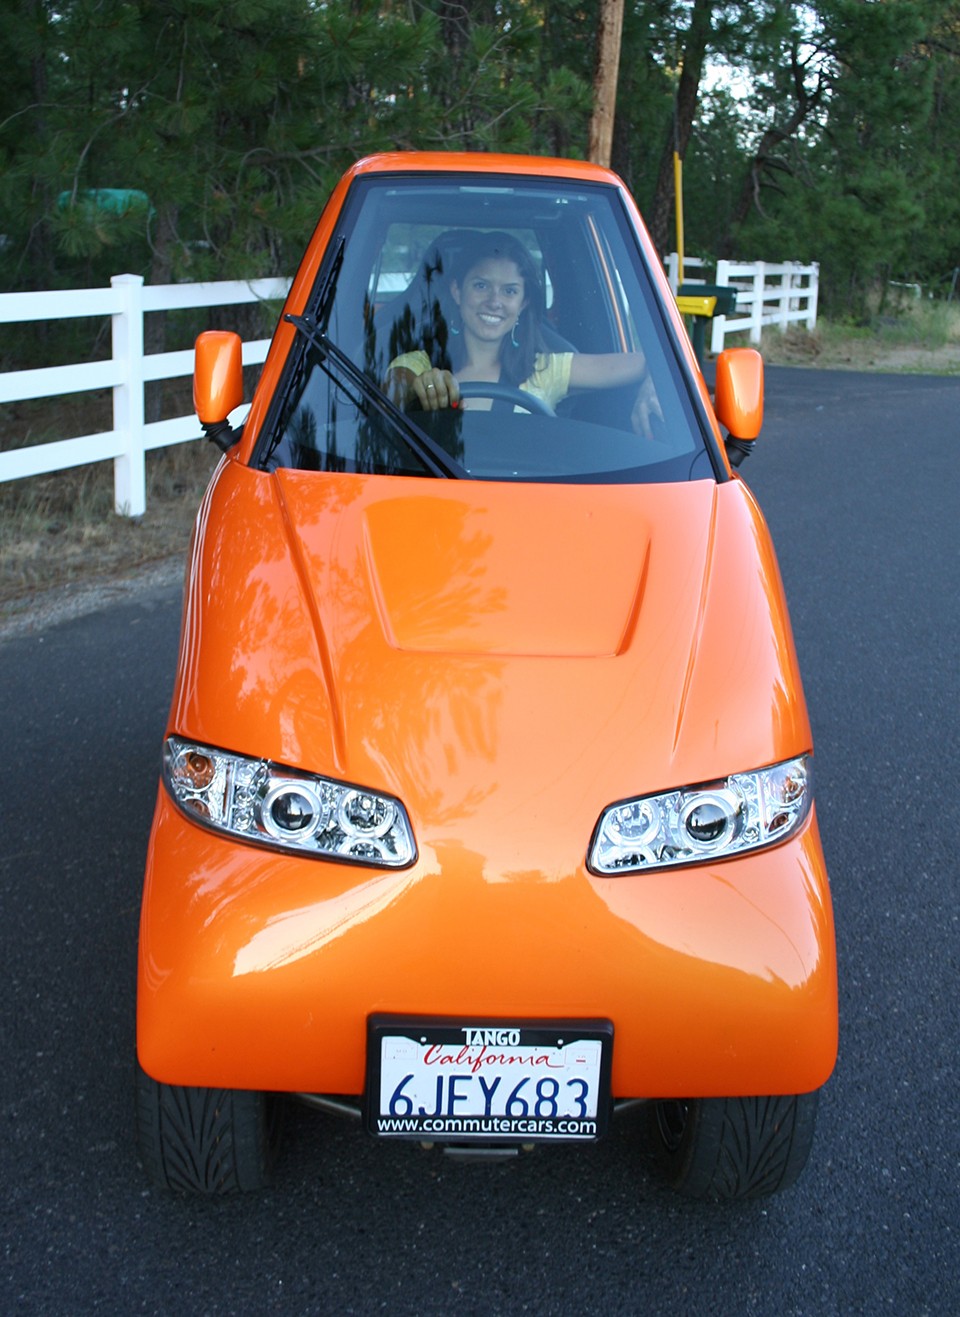 The Tango T600, the Electric Micro-Car With Big Dreams and a $420,000